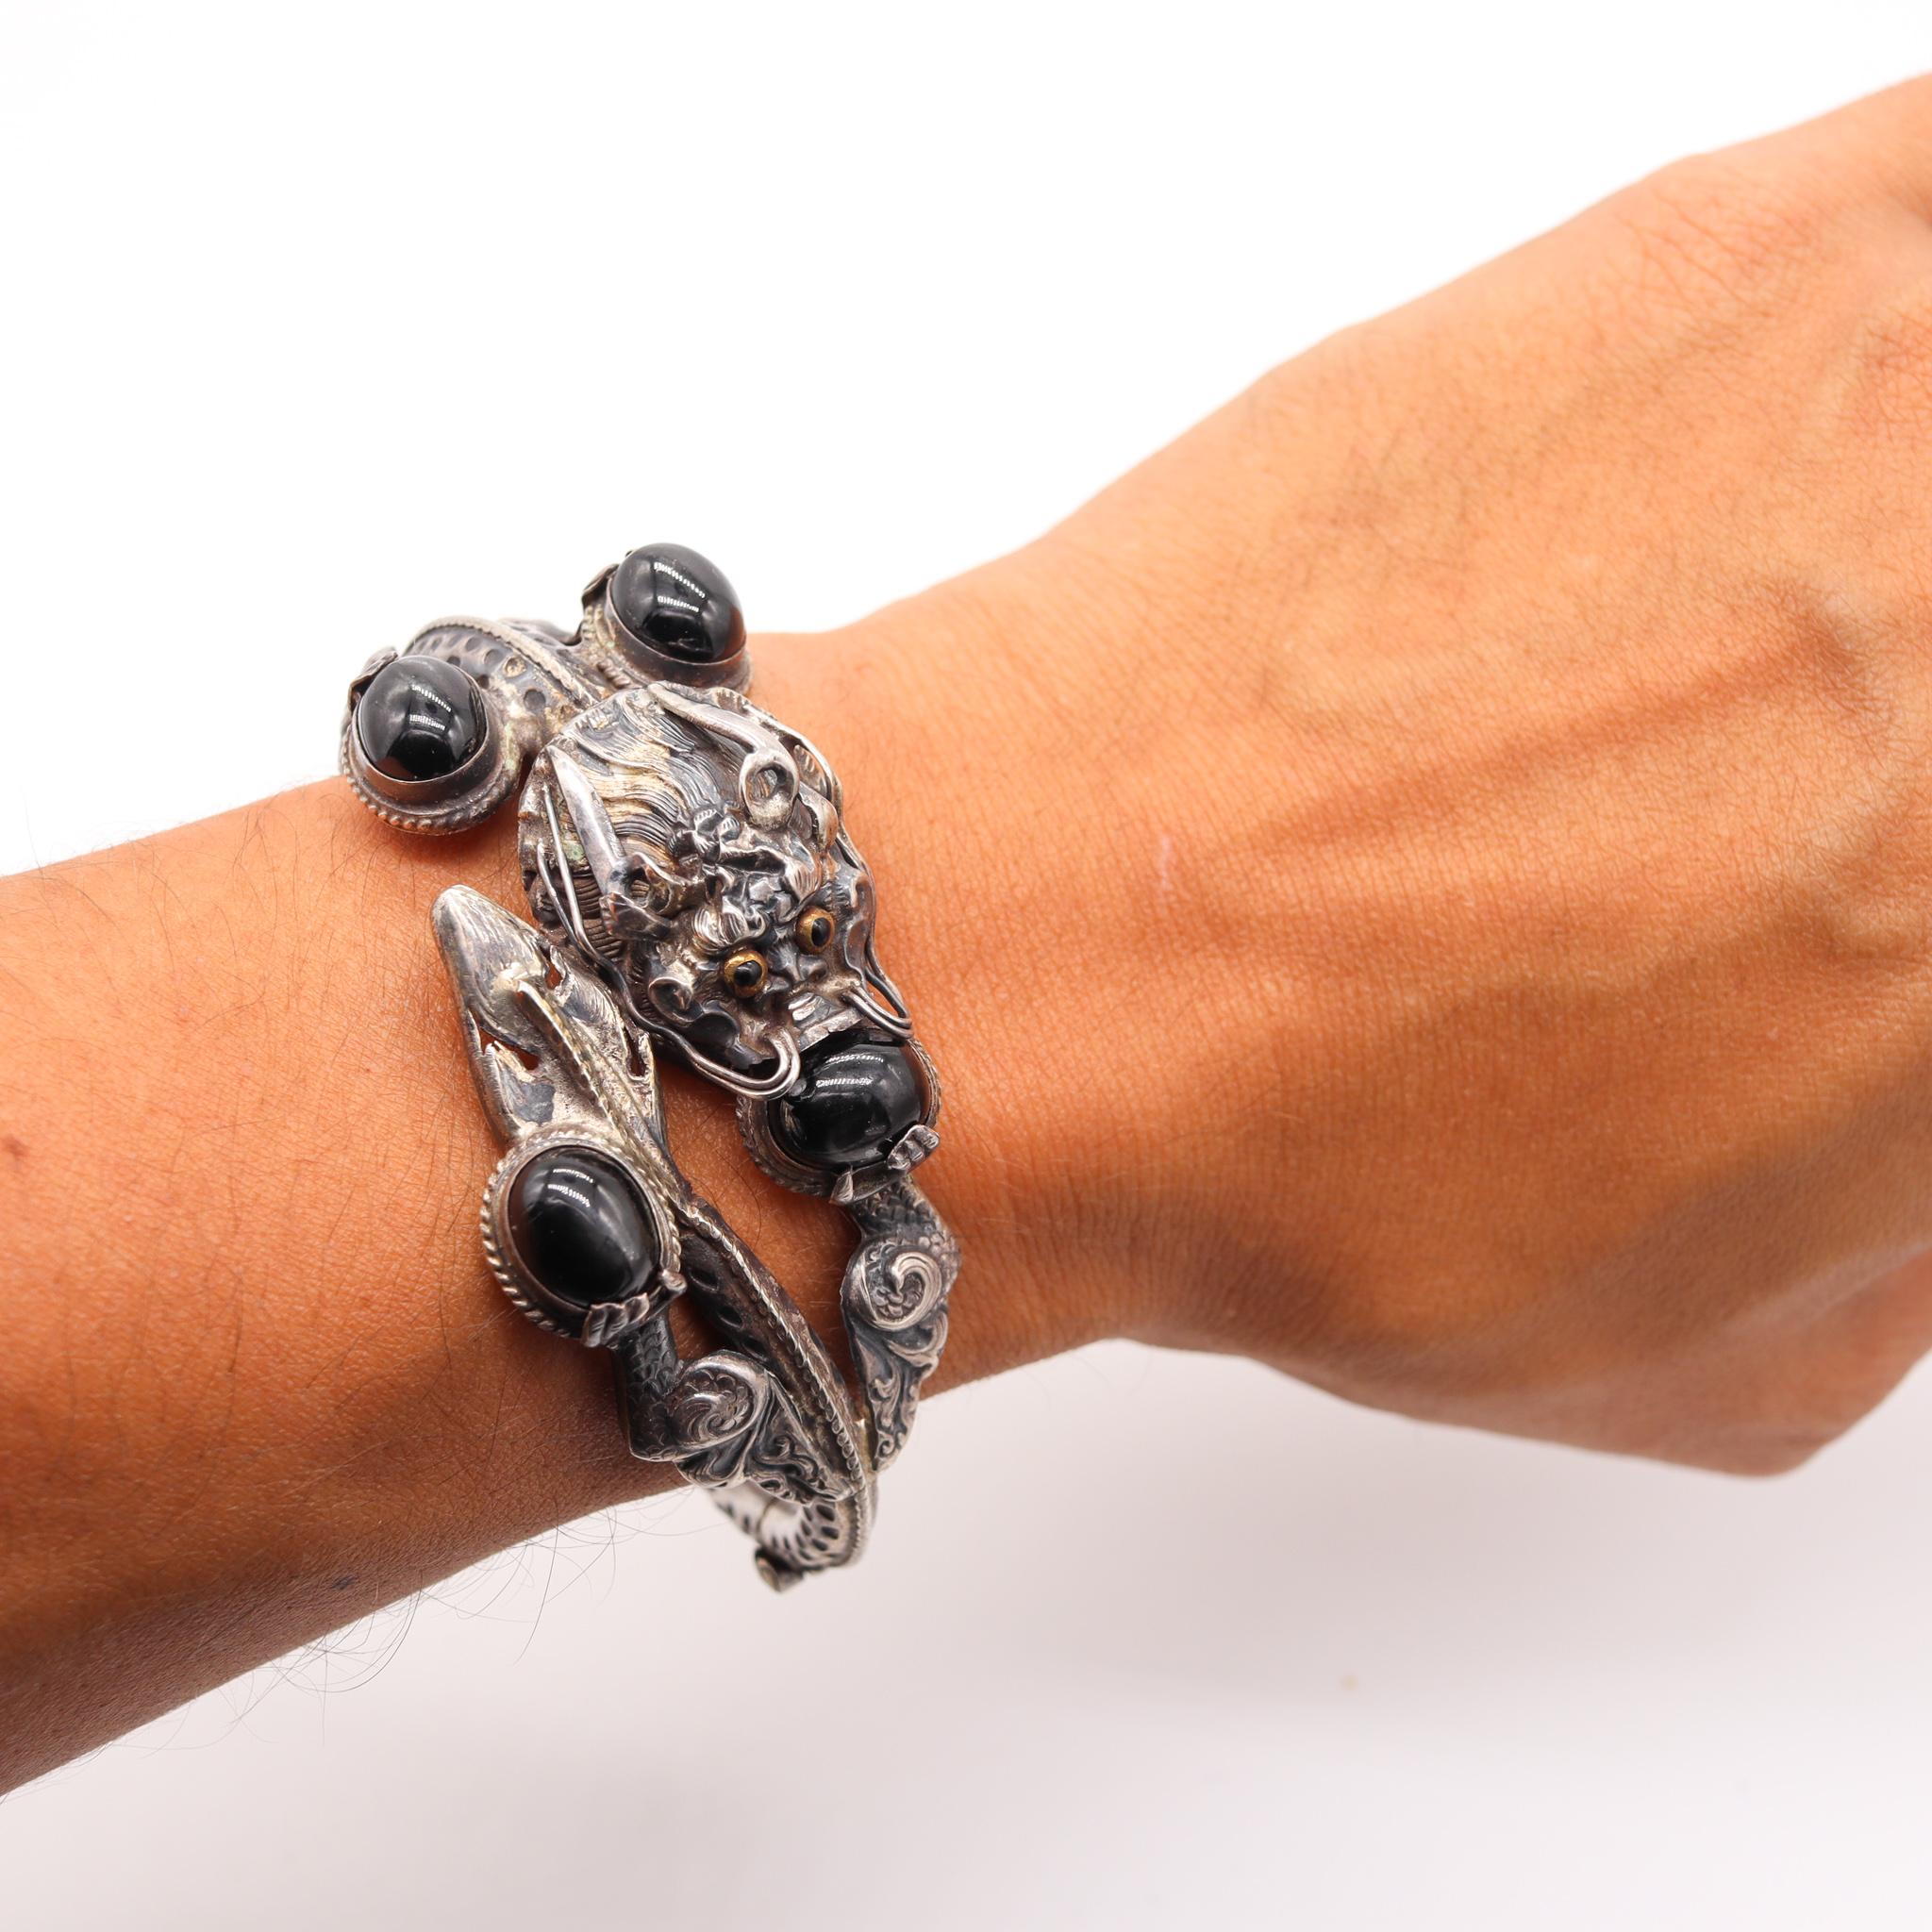 China 1900 Export Dragon Bracelet in 925 Sterling Silver with Cat's Eye Obsidian 2